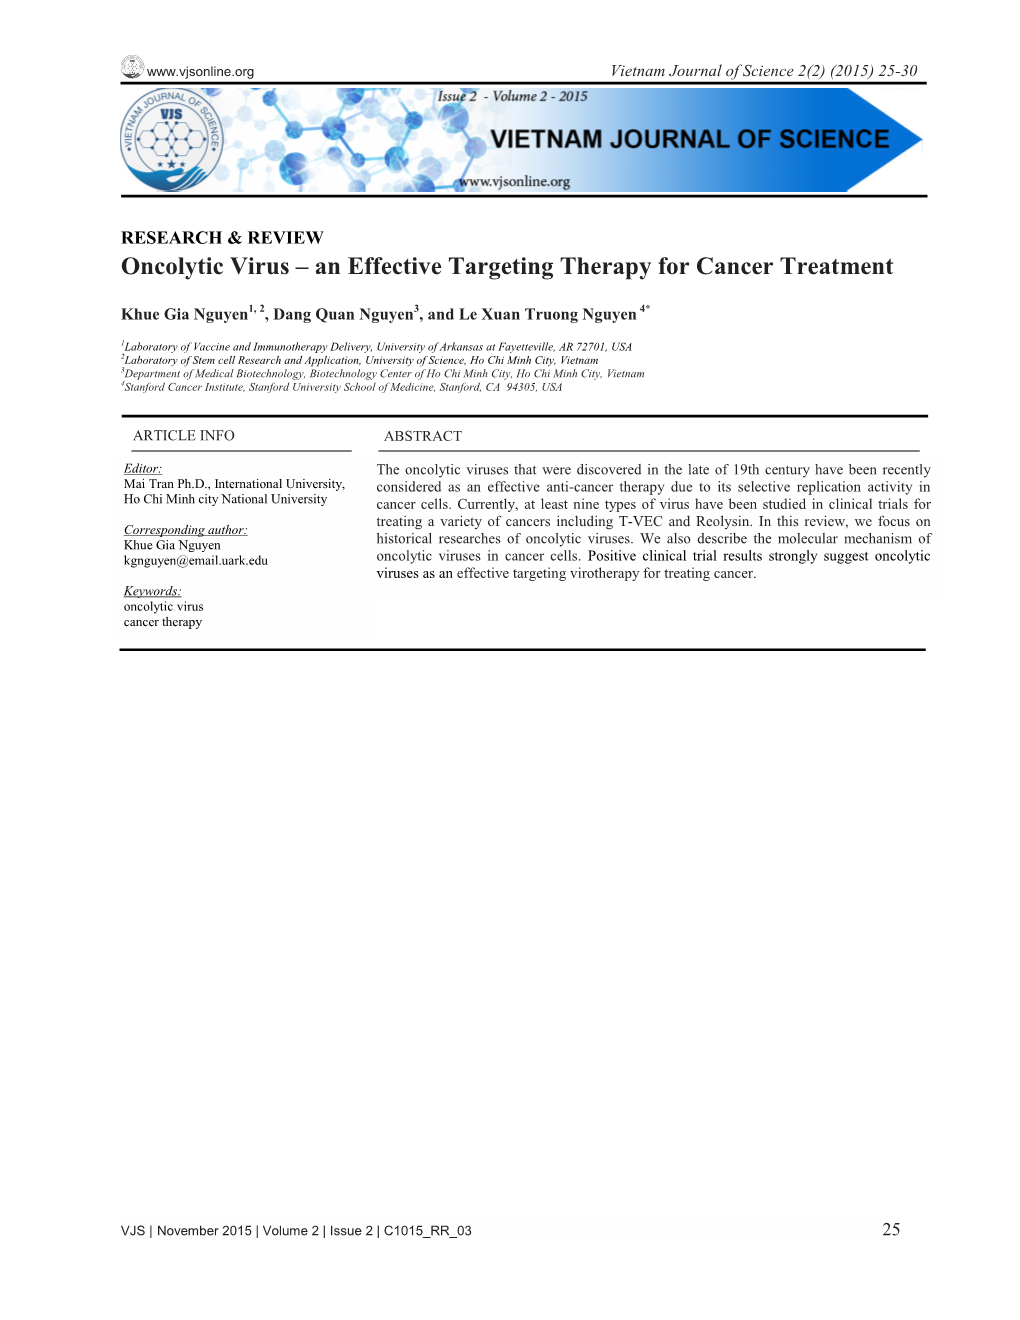 An Effective Targeting Therapy for Cancer Treatment